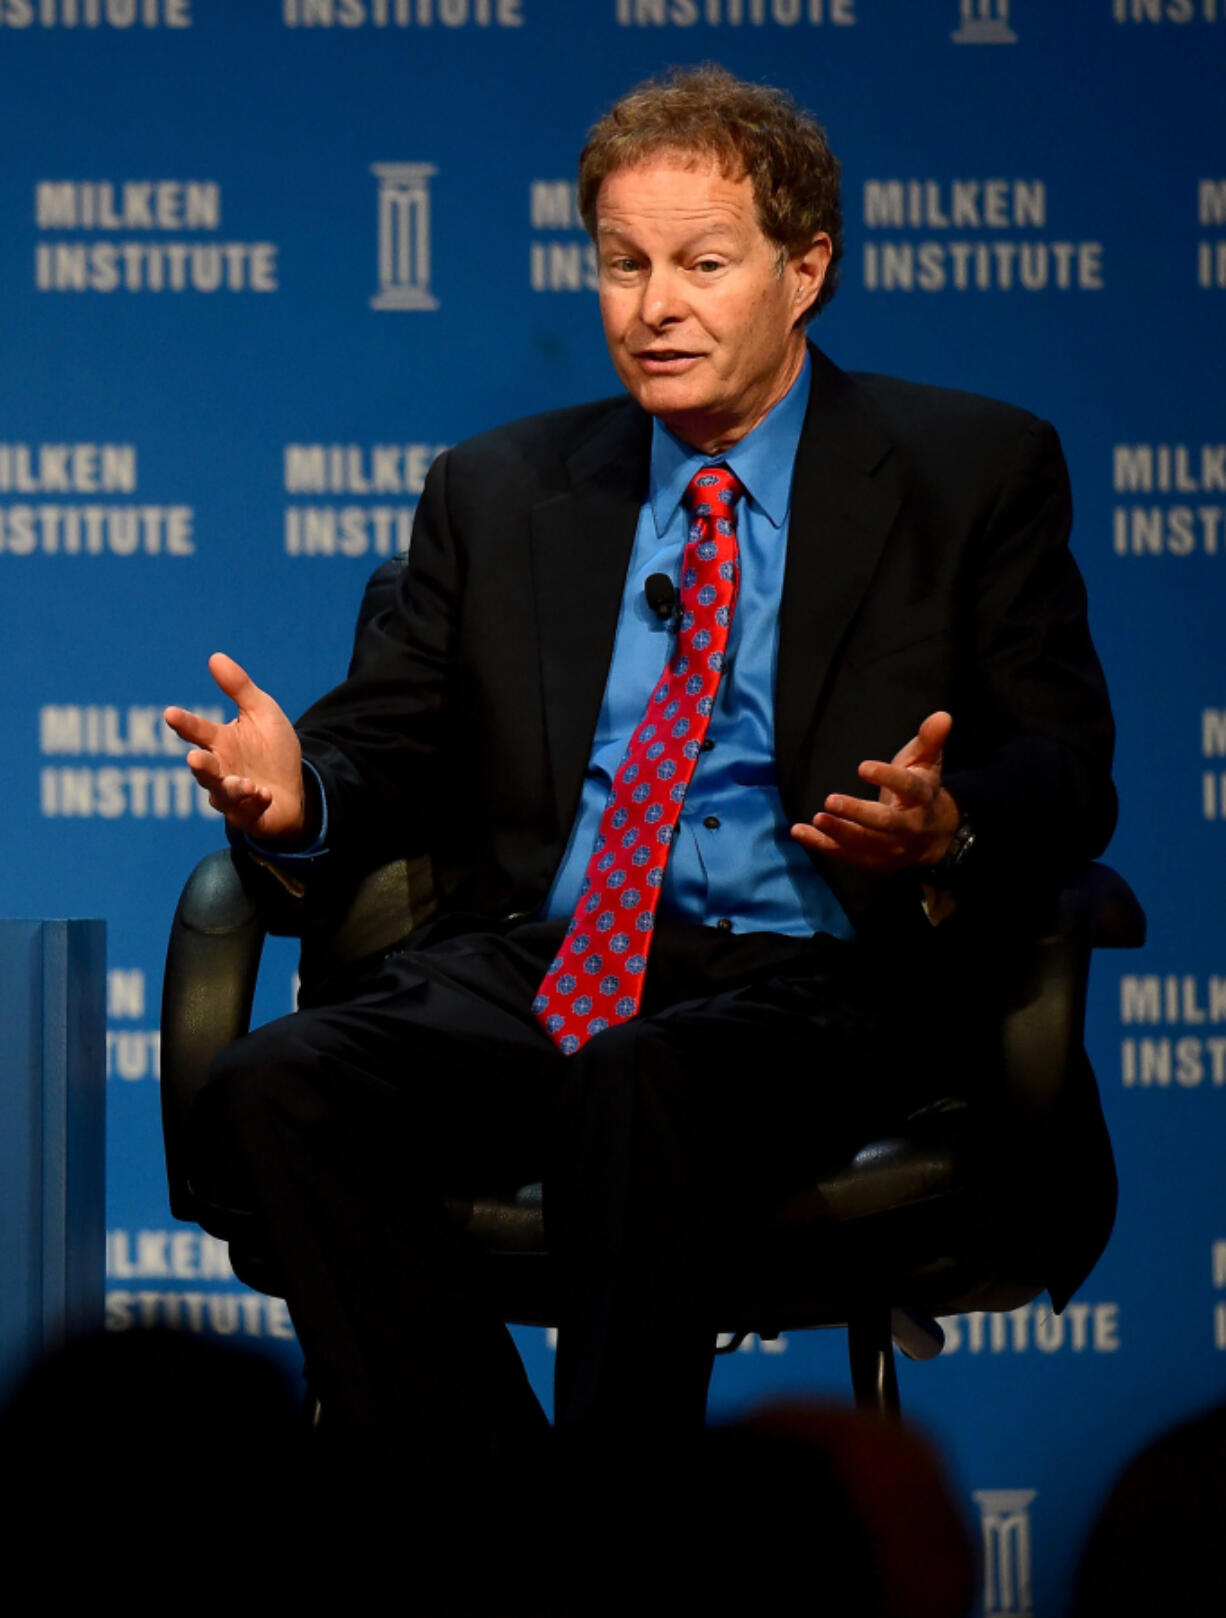 John Mackey, co-founder and co-CEO, Whole Foods Market, speaks on the panel "Leaders of Companies that are Changing the World" at the 2016 Milken Institute Global Conference in Beverly Hills, California on May 2, 2016. (Frederic J.